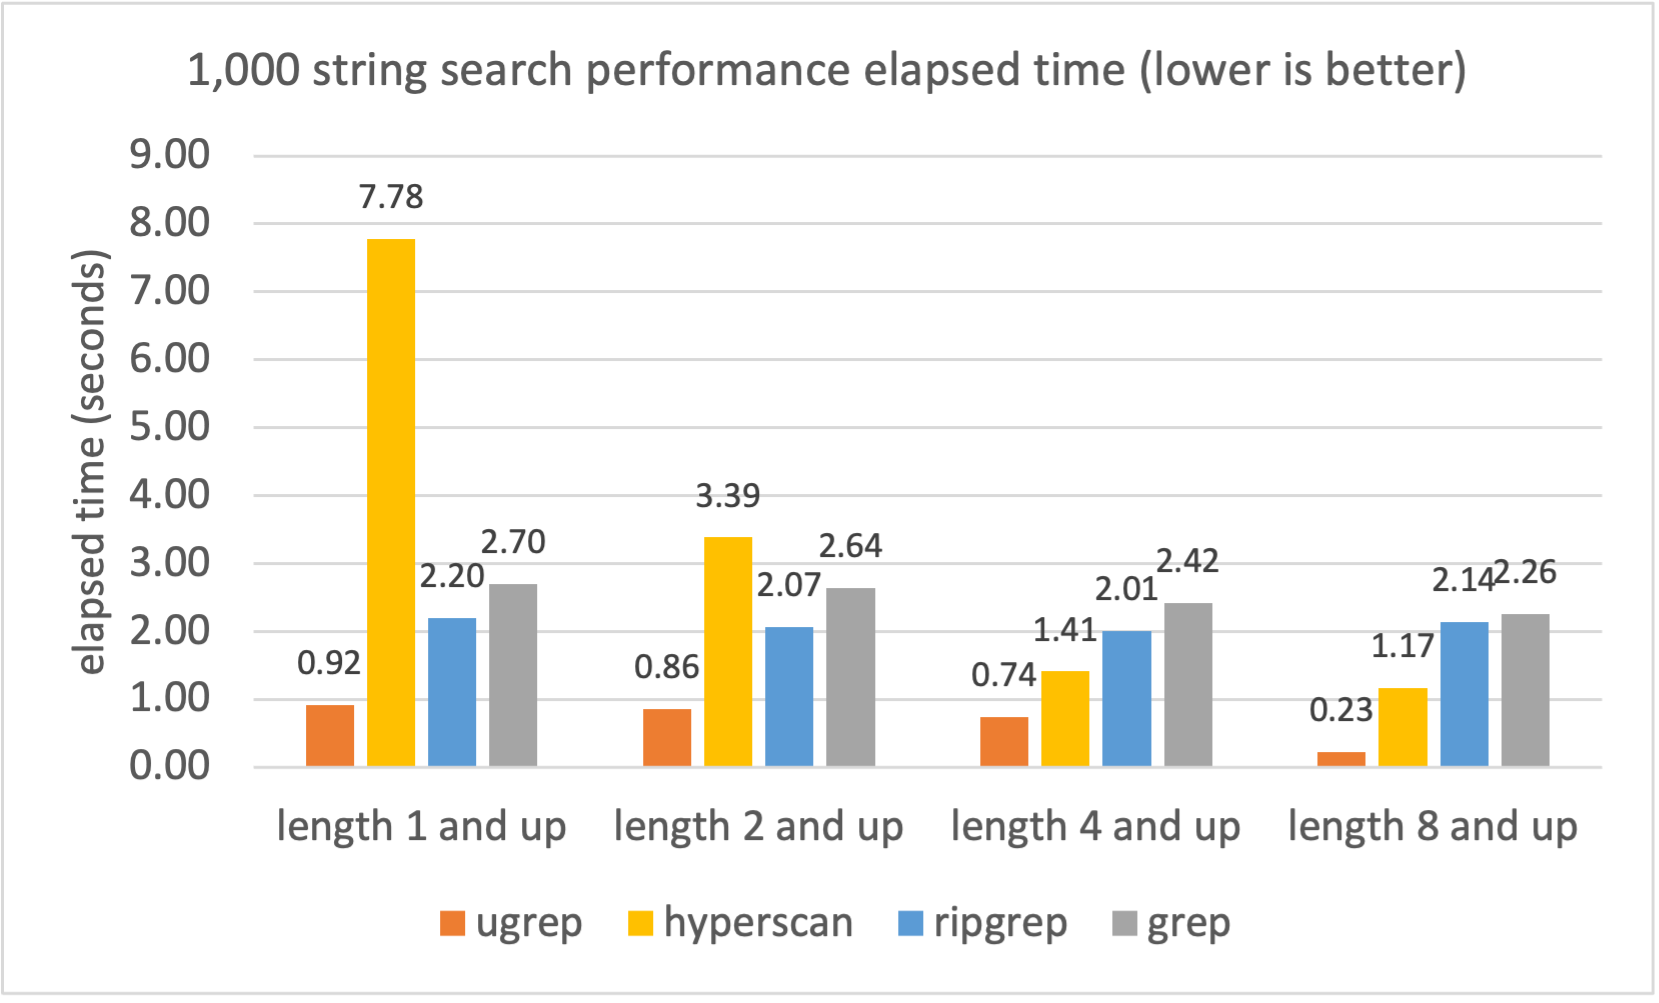 1,000 string search performance elapsed time (lower is better)